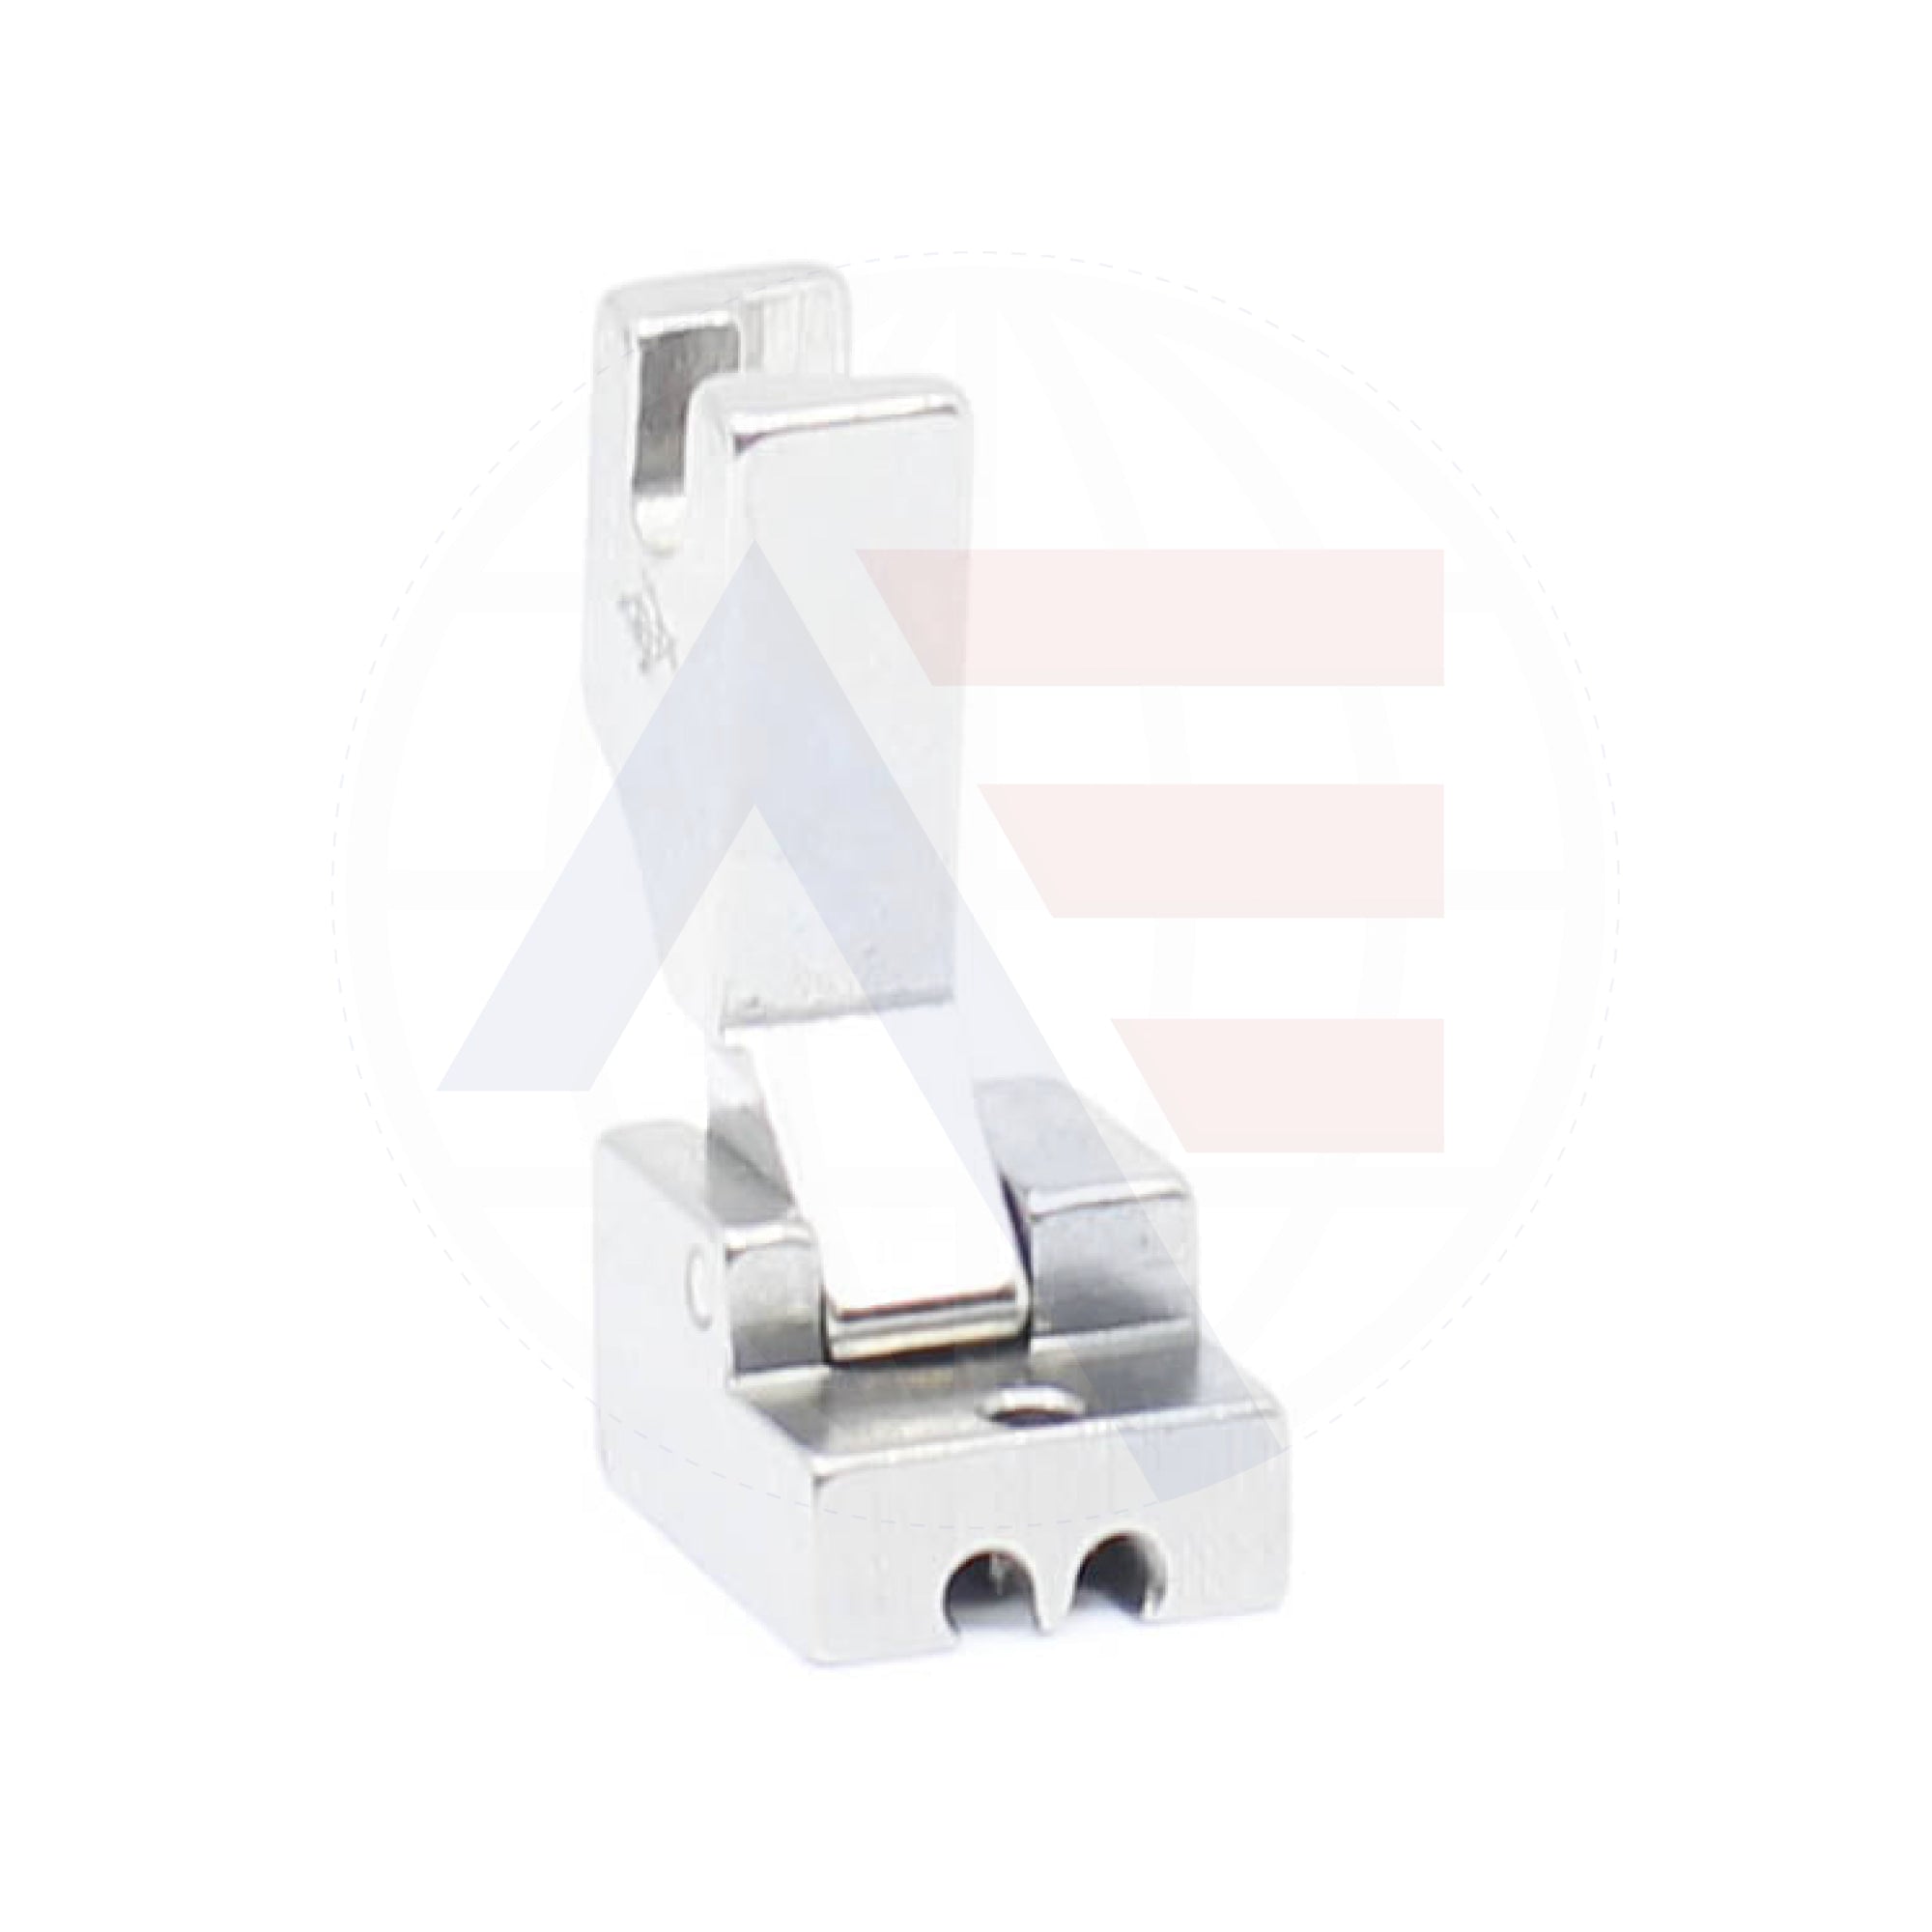 S518 Invisible Zip Foot Sewing Machine Spare Parts